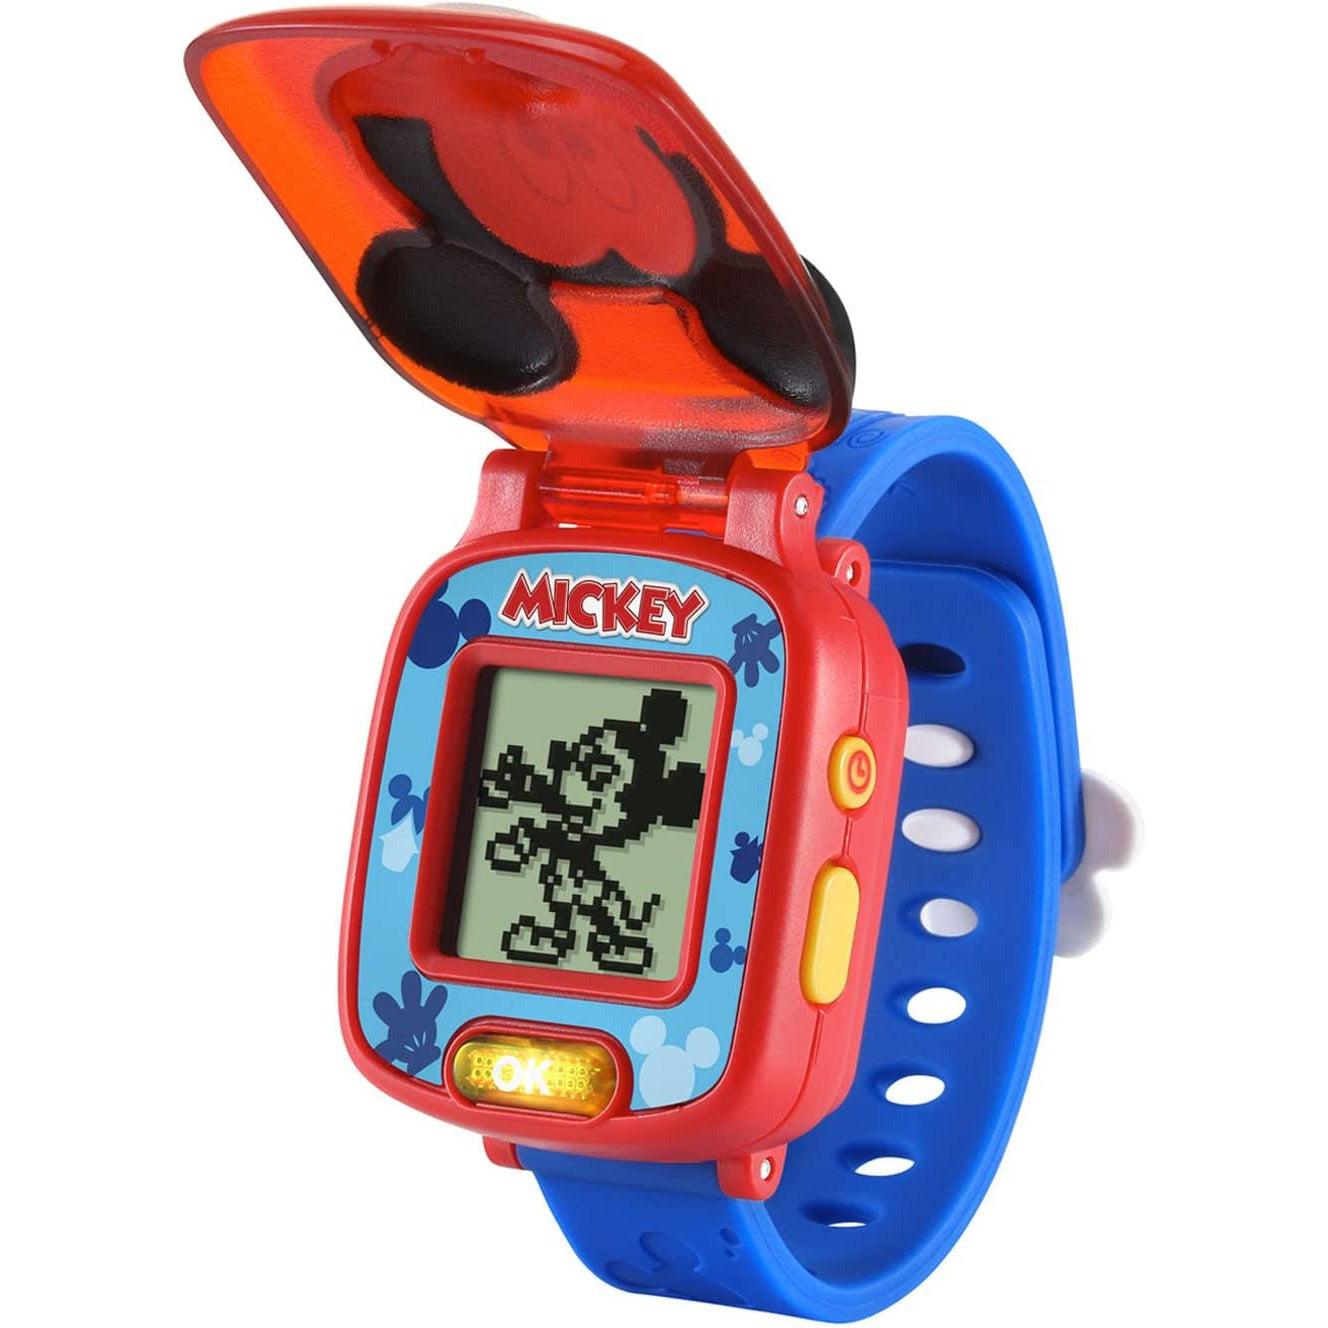 VTech Disney Junior Mickey - Mickey Mouse Learning Watch - BumbleToys - 5-7 Years, Kids, Mickey Mouse, Pre-Order, Watch